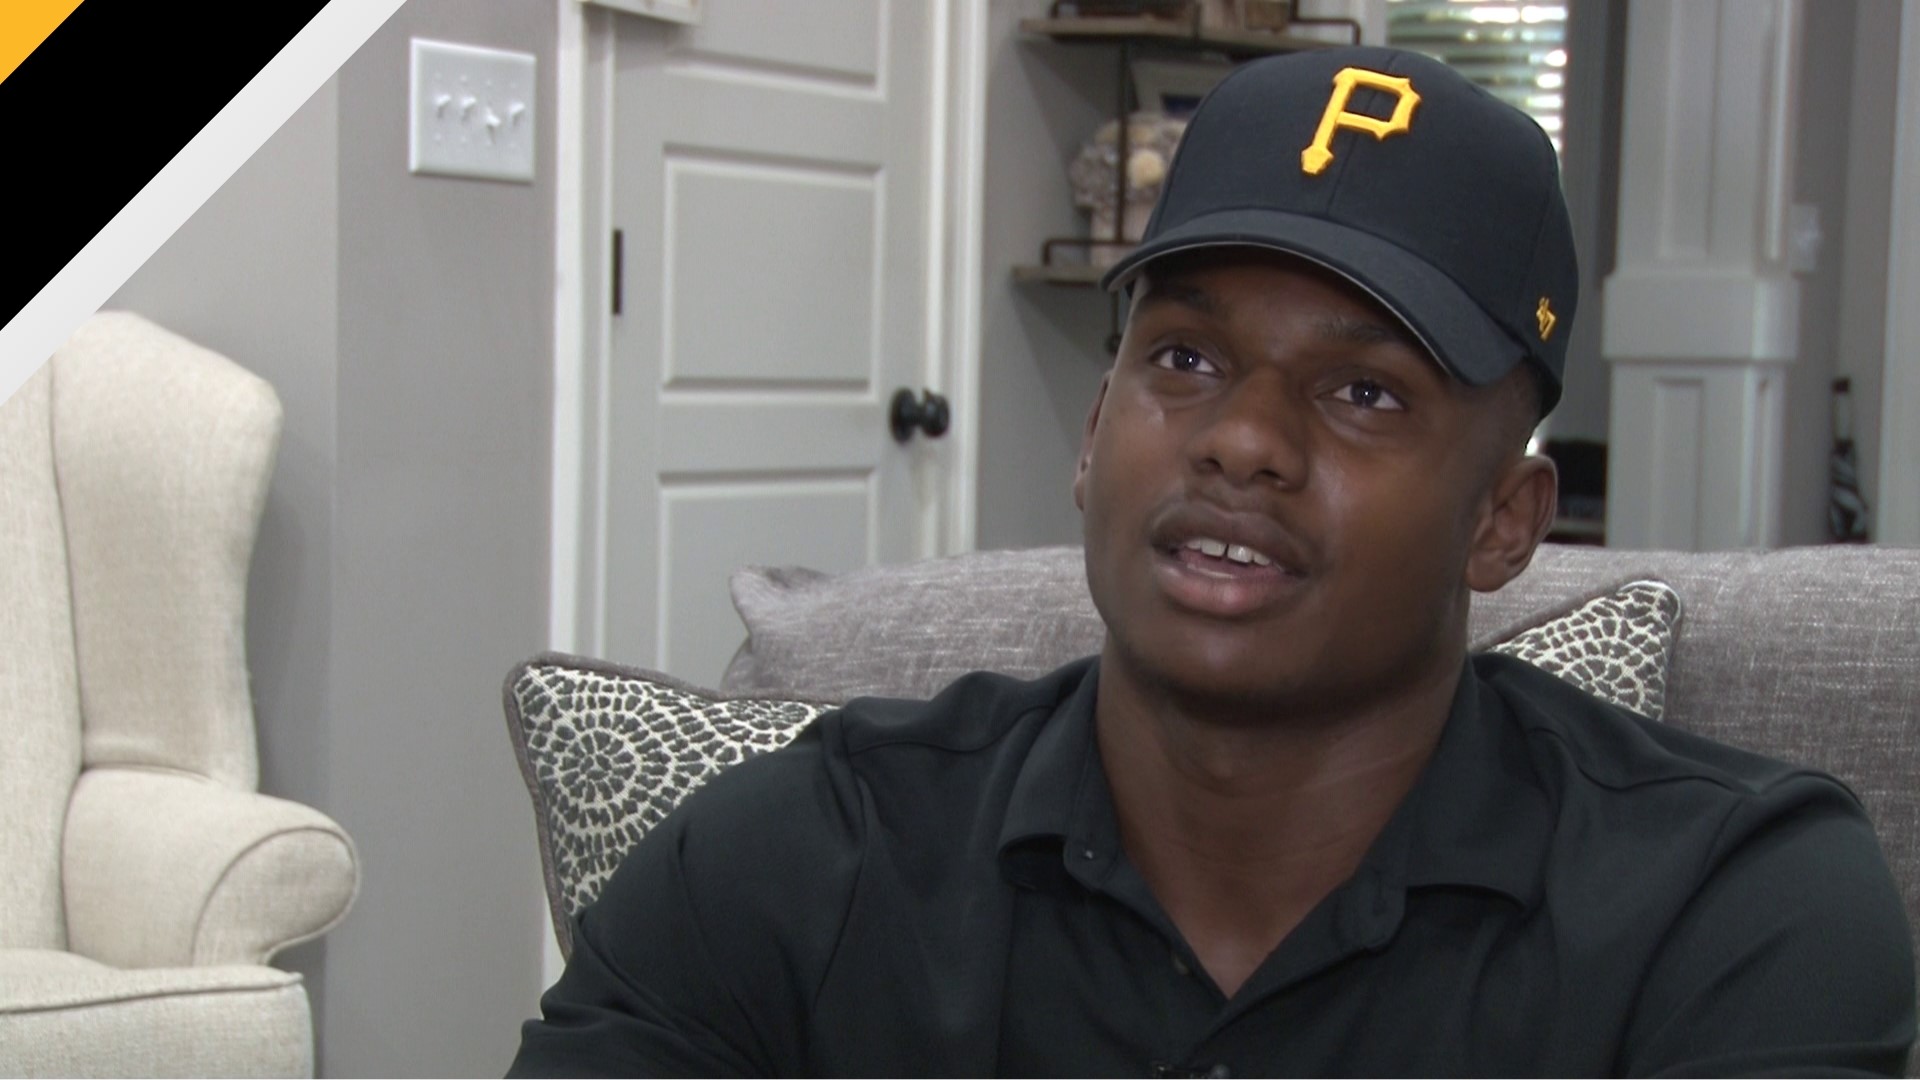 The Houston County High School and University of Georgia alum was selected in the seventh round of the 2023 MLB Draft by the Pittsburgh Pirates.